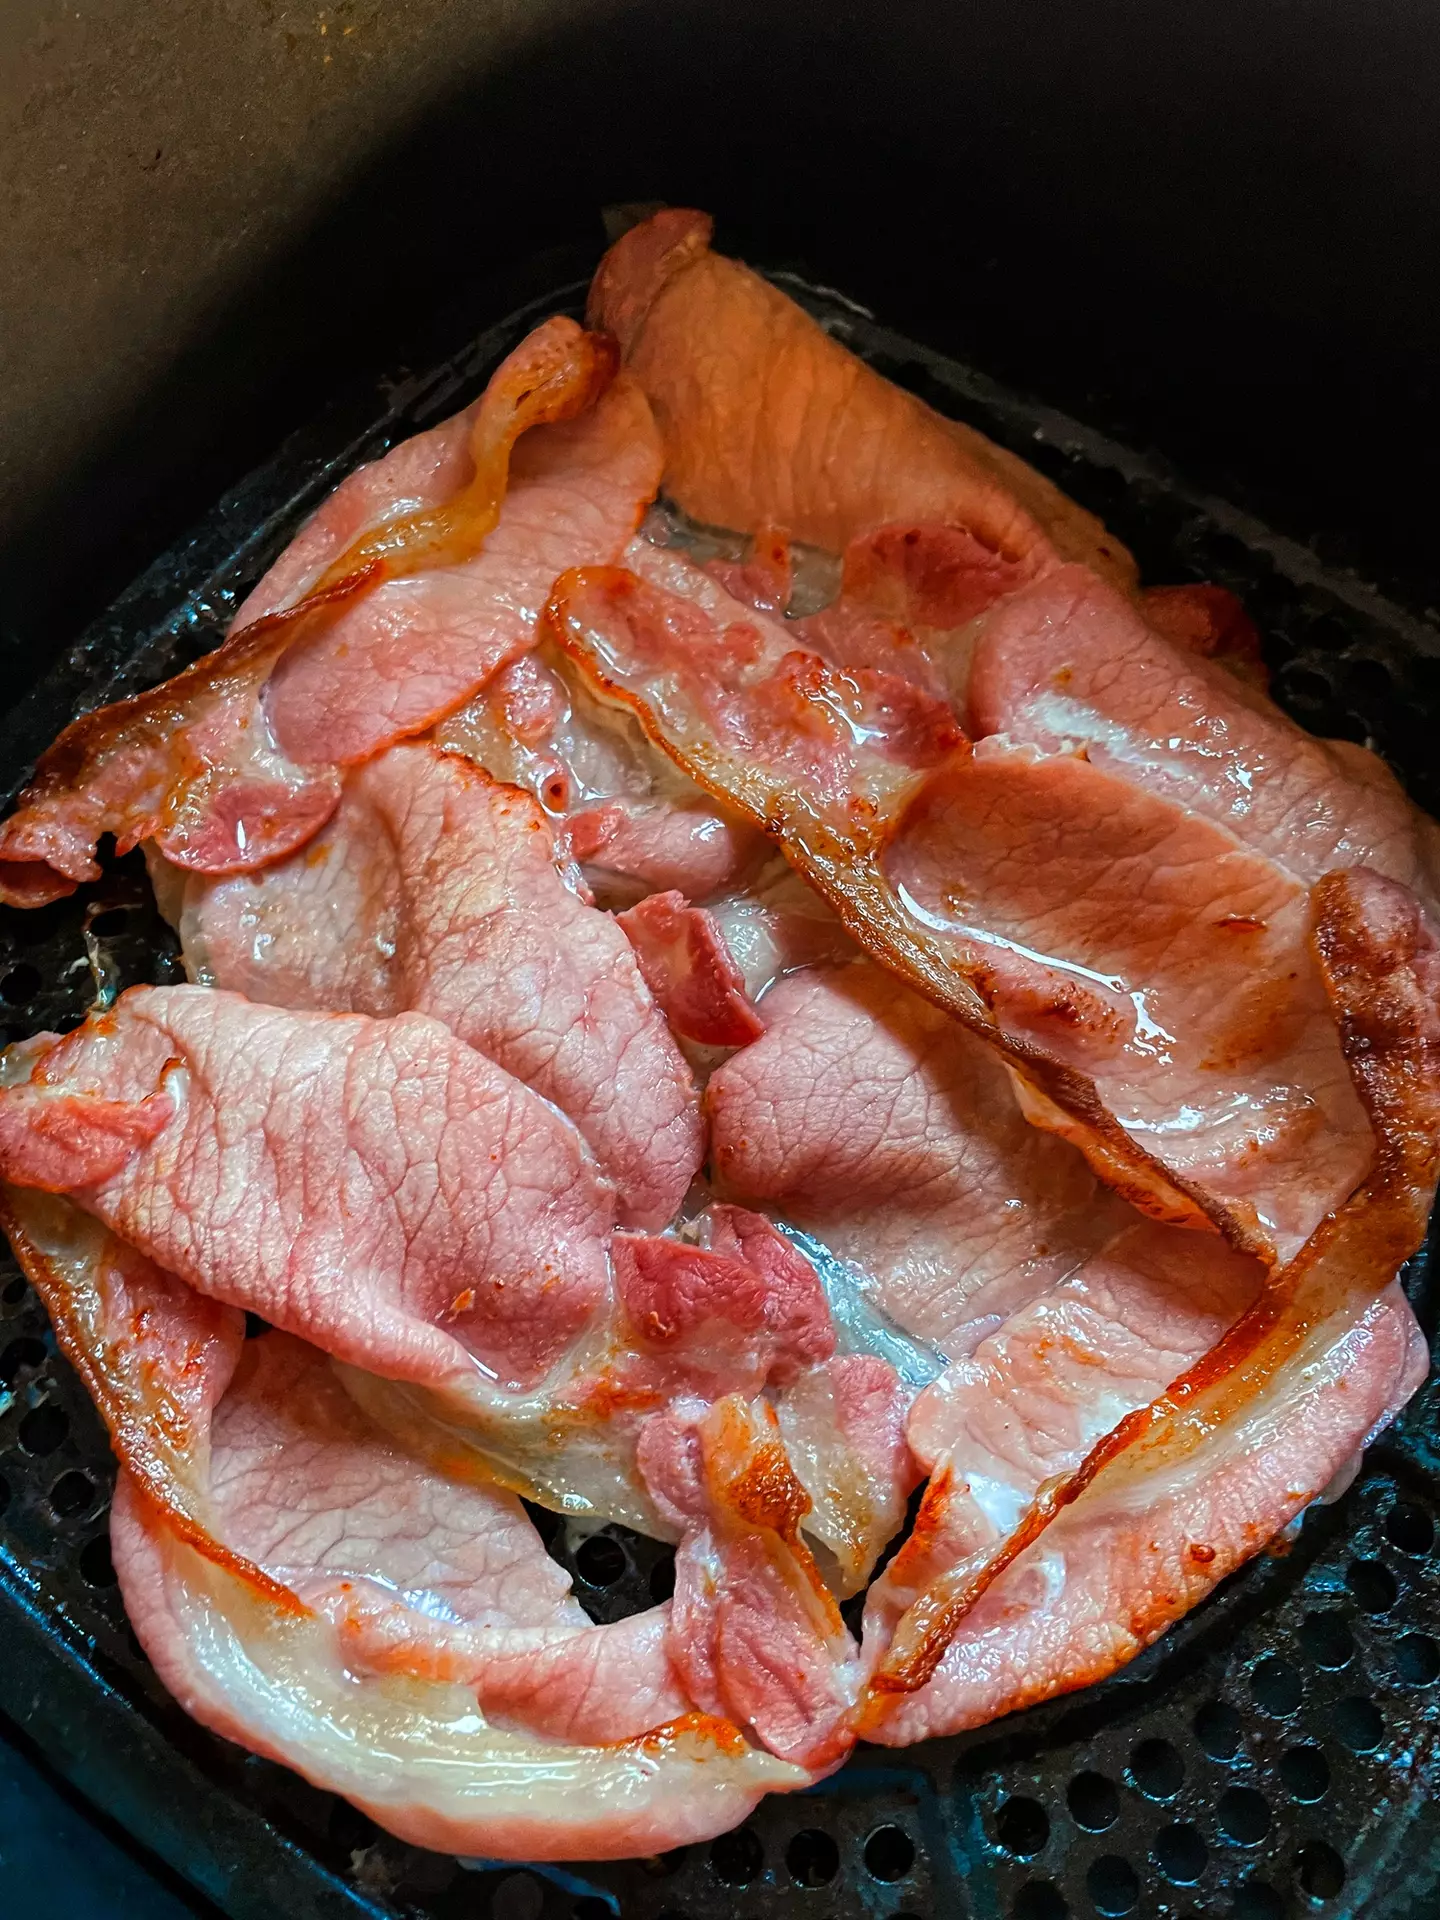 It might be best to cook your bacon elsewhere.